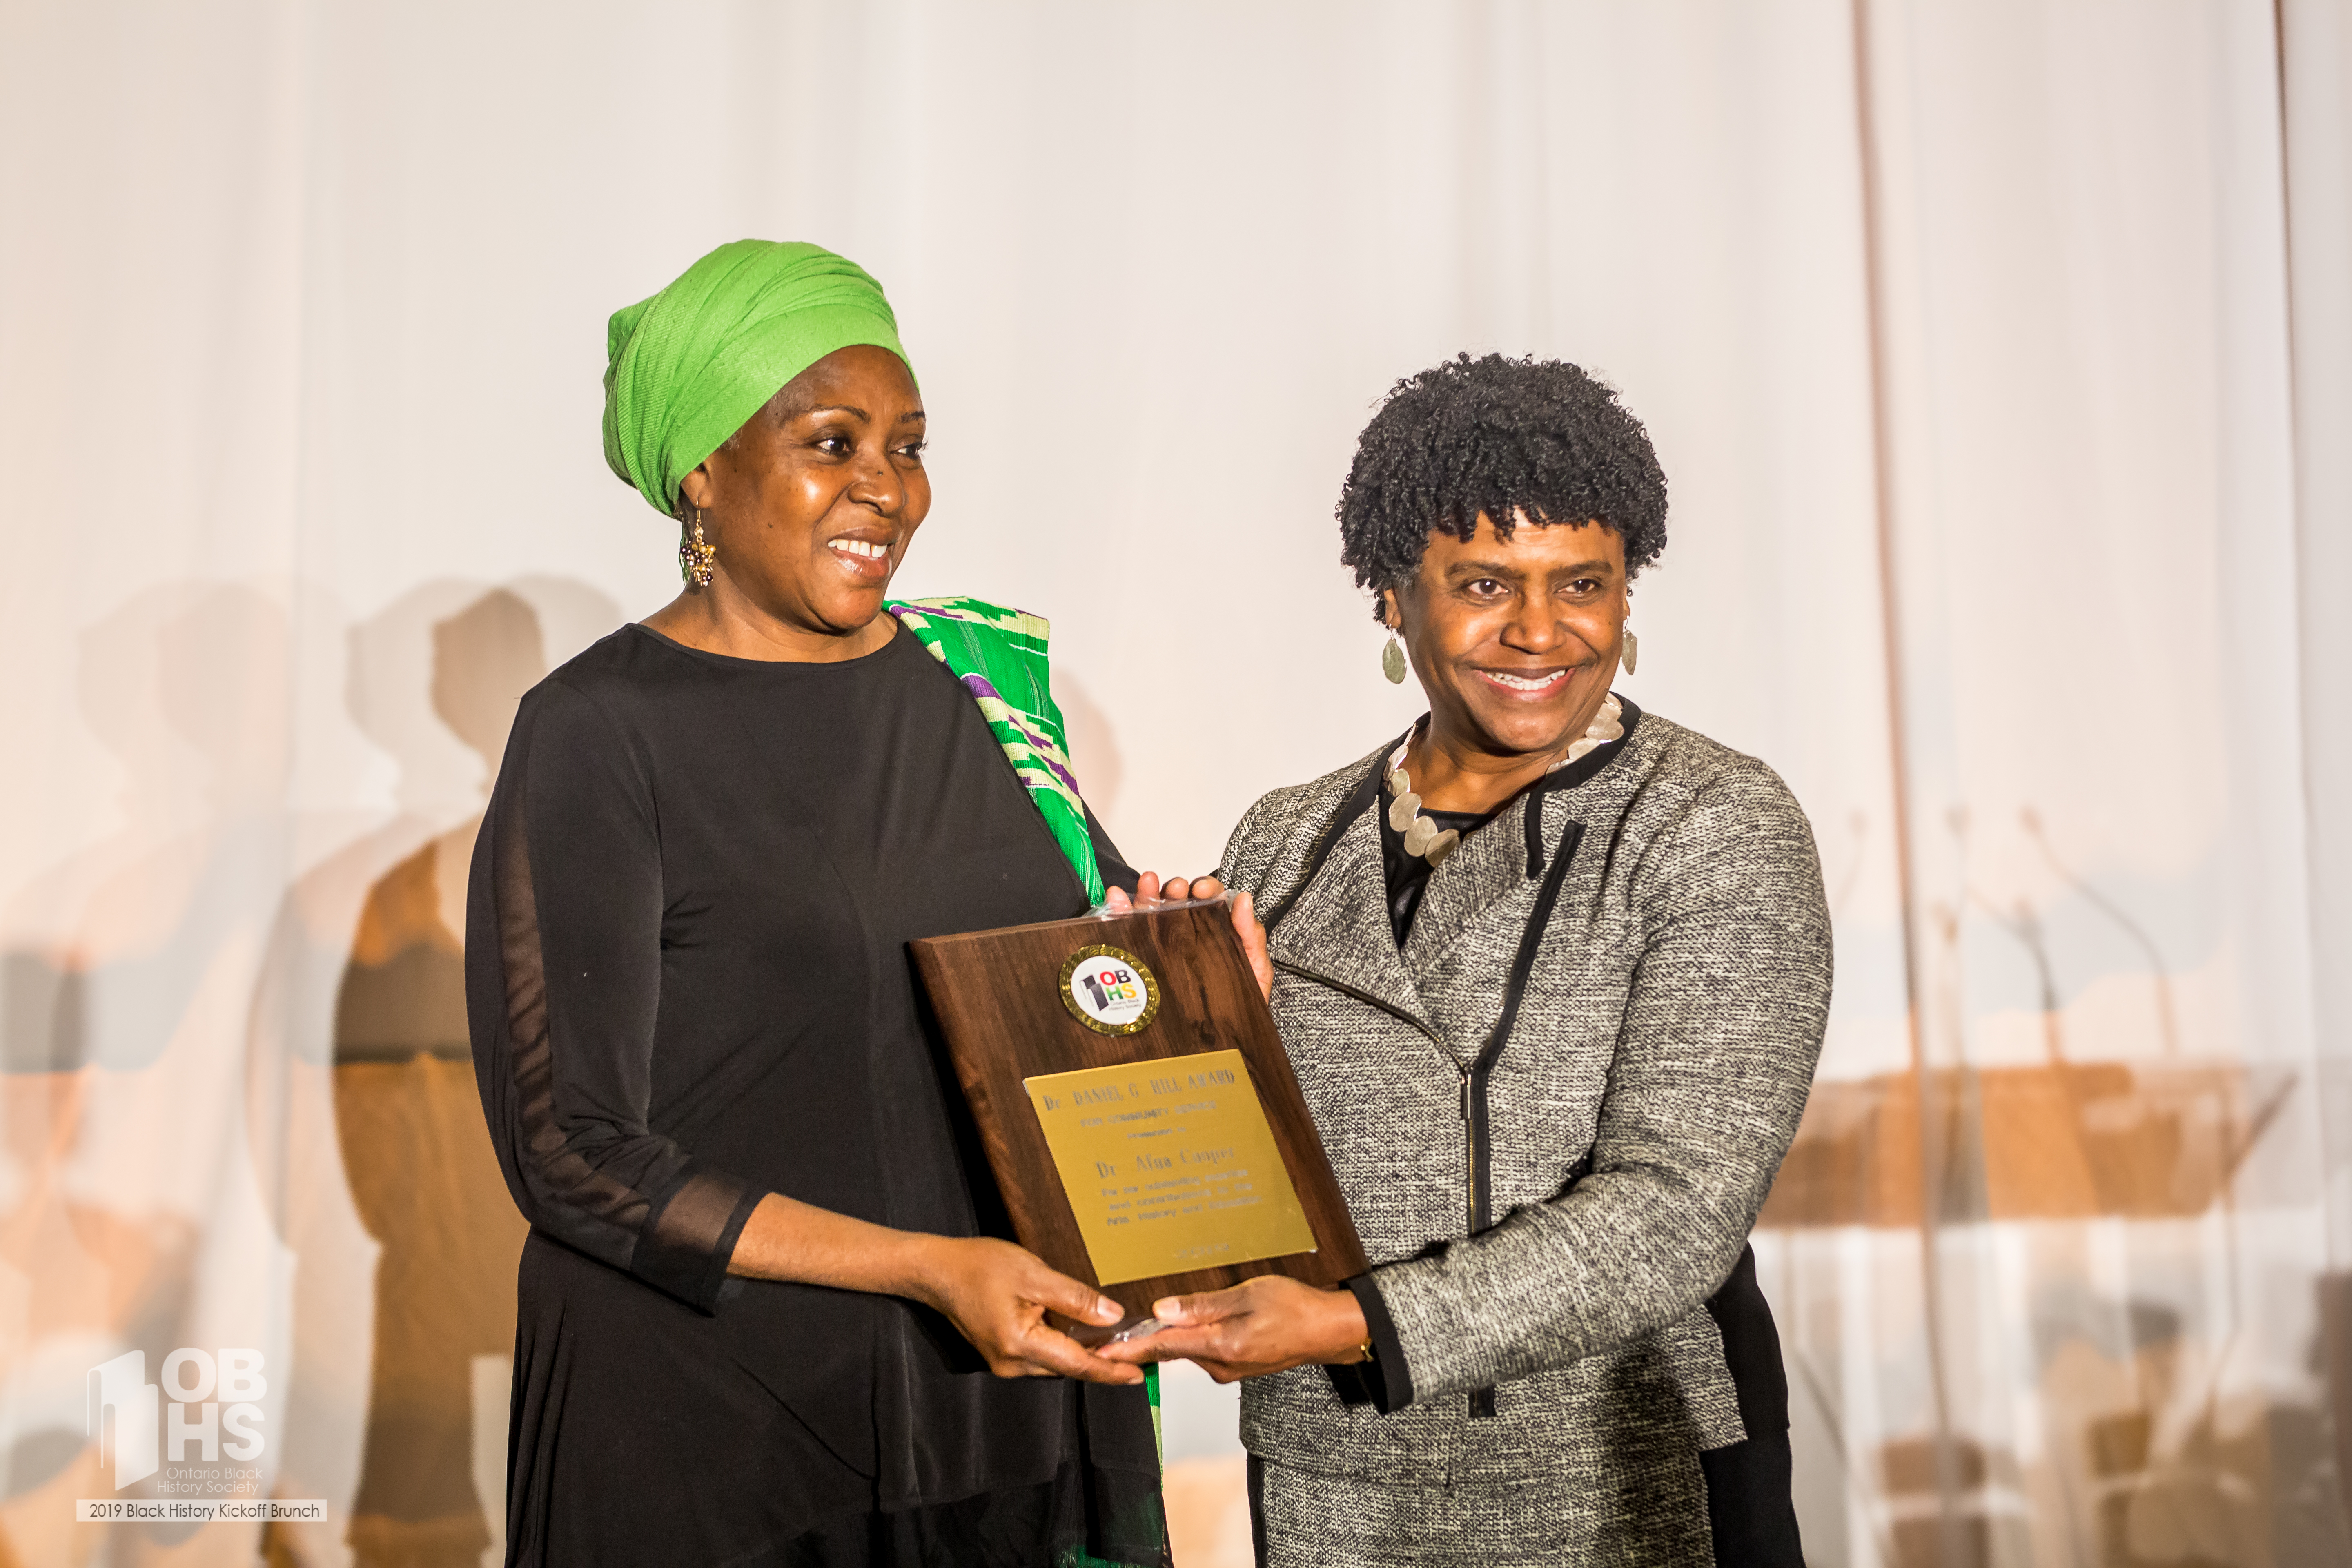 Kim Bernhardt presents an award to Dr. Afua Cooper - photo by www.sayhilondon.com